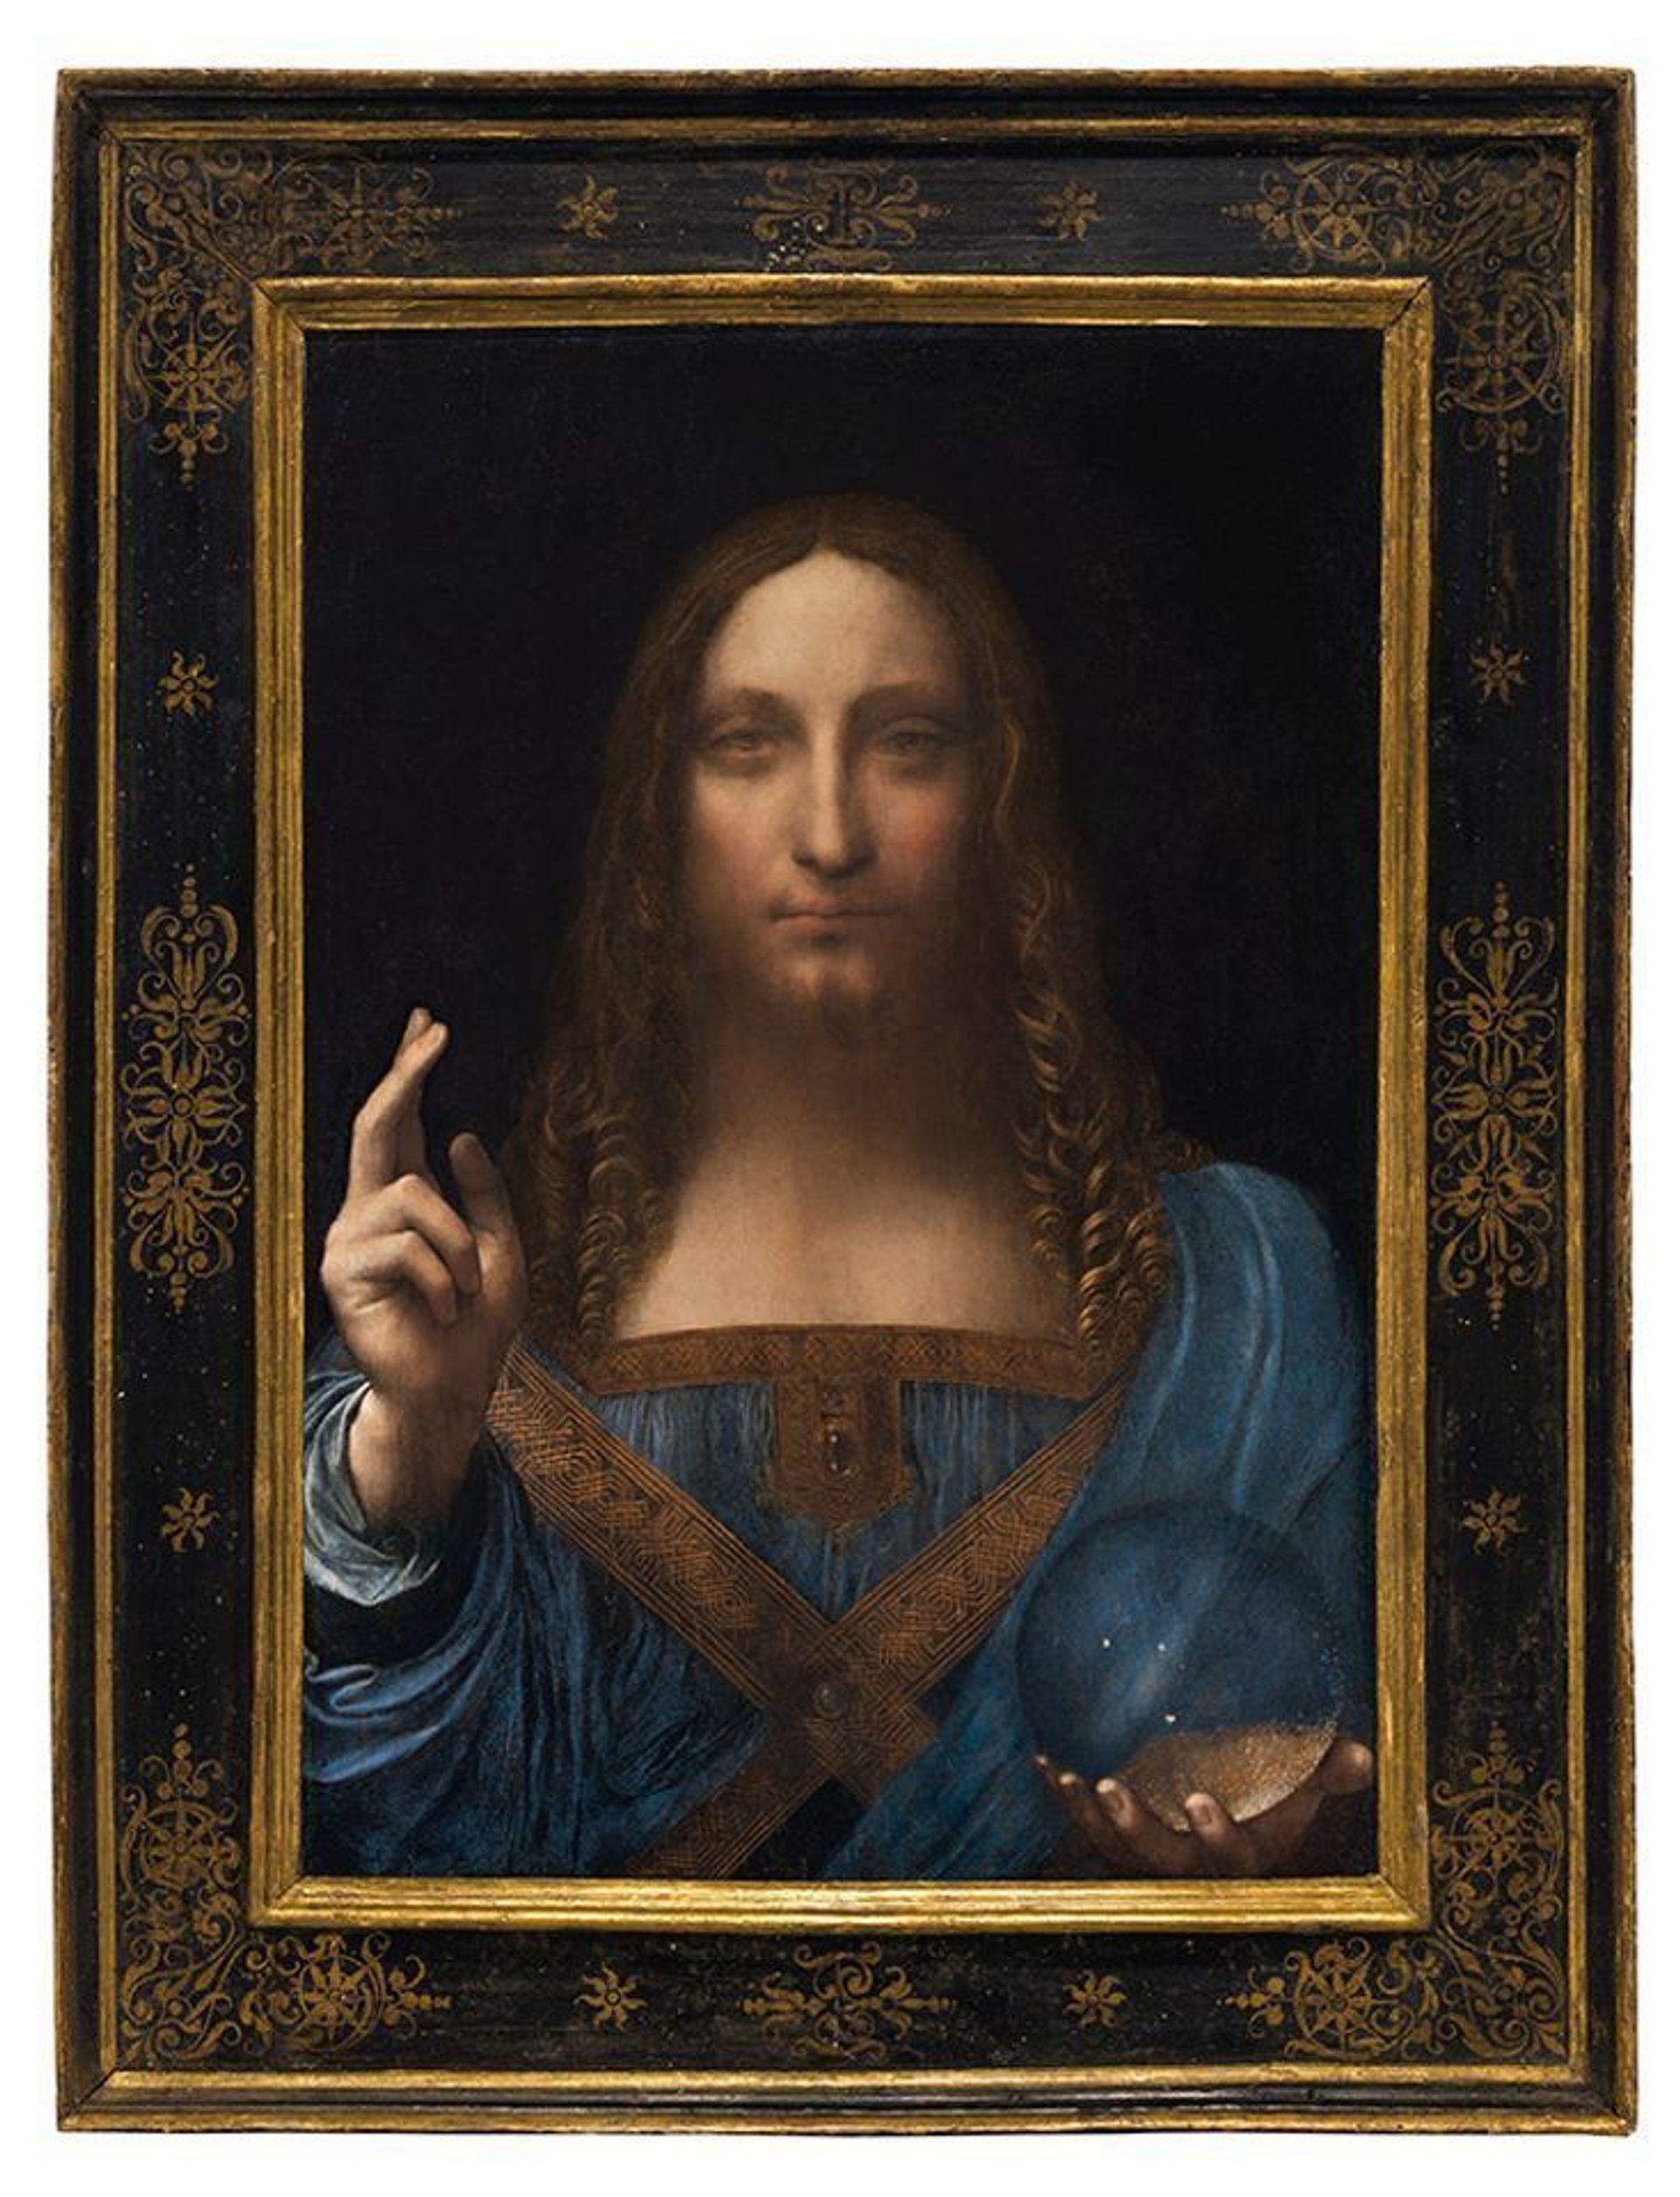 Salvator Mundi is becoming the most famous painting in the world 